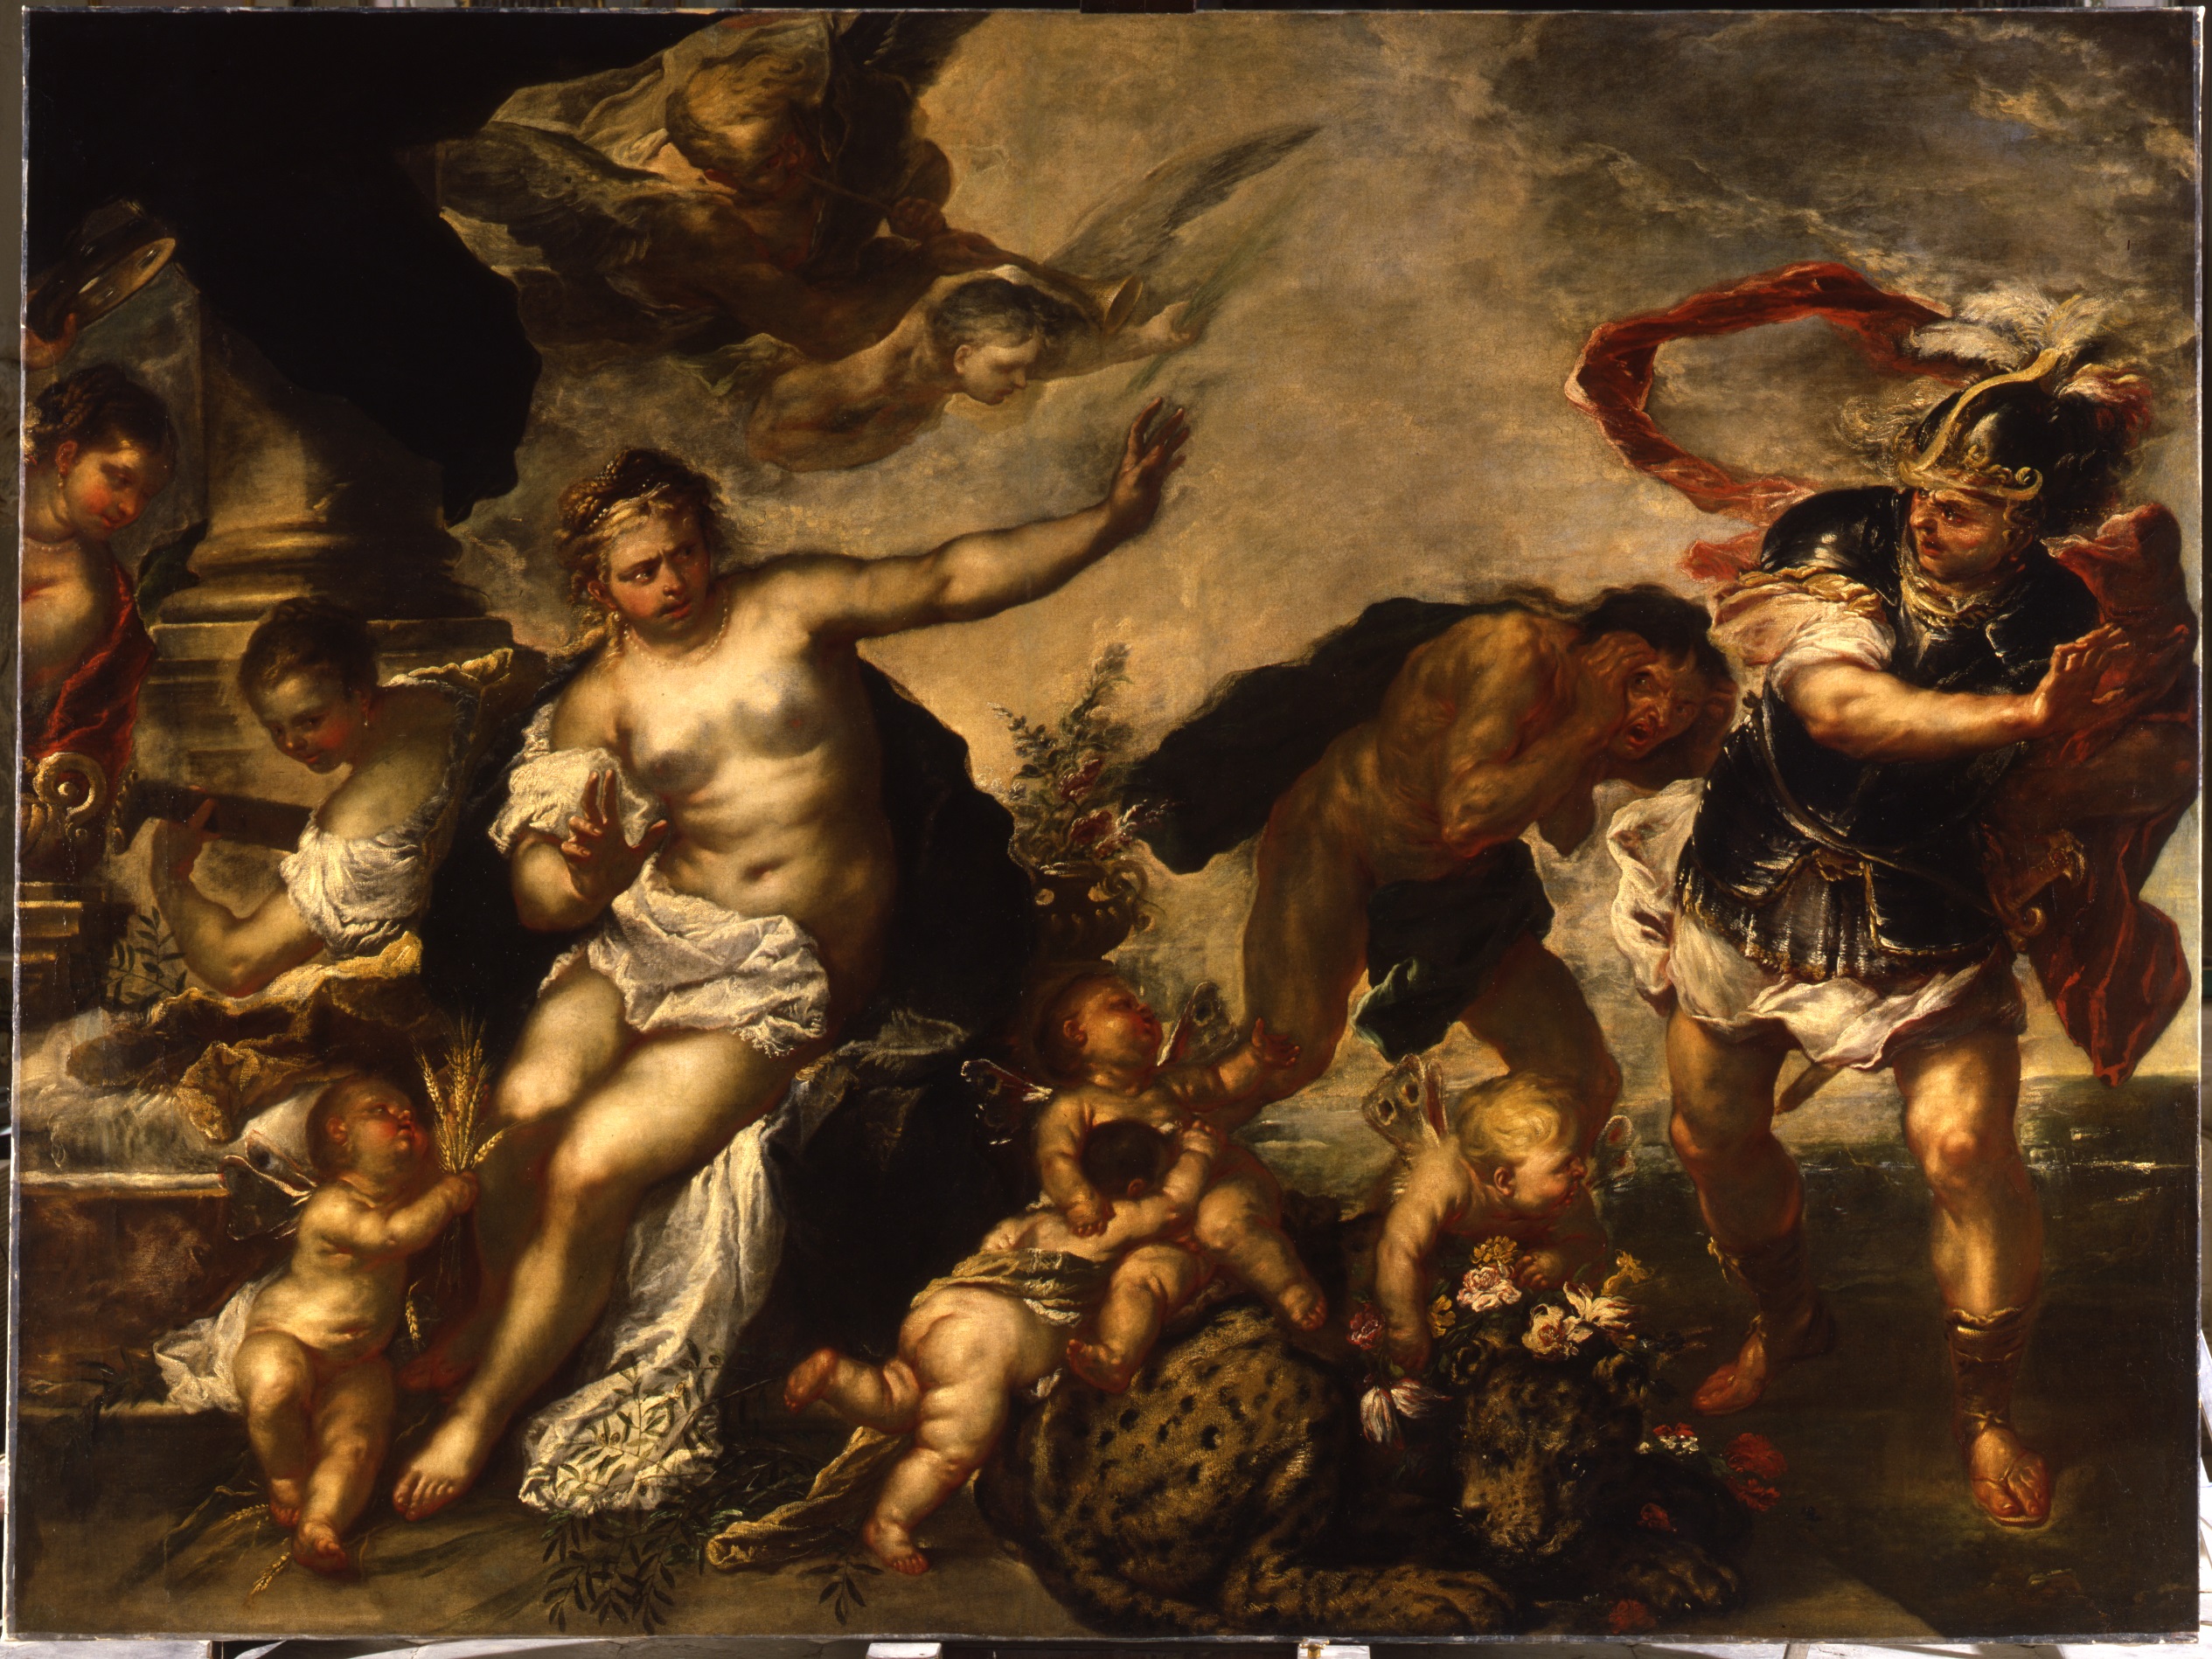 Luca Giordano, Allegory of Peace and War